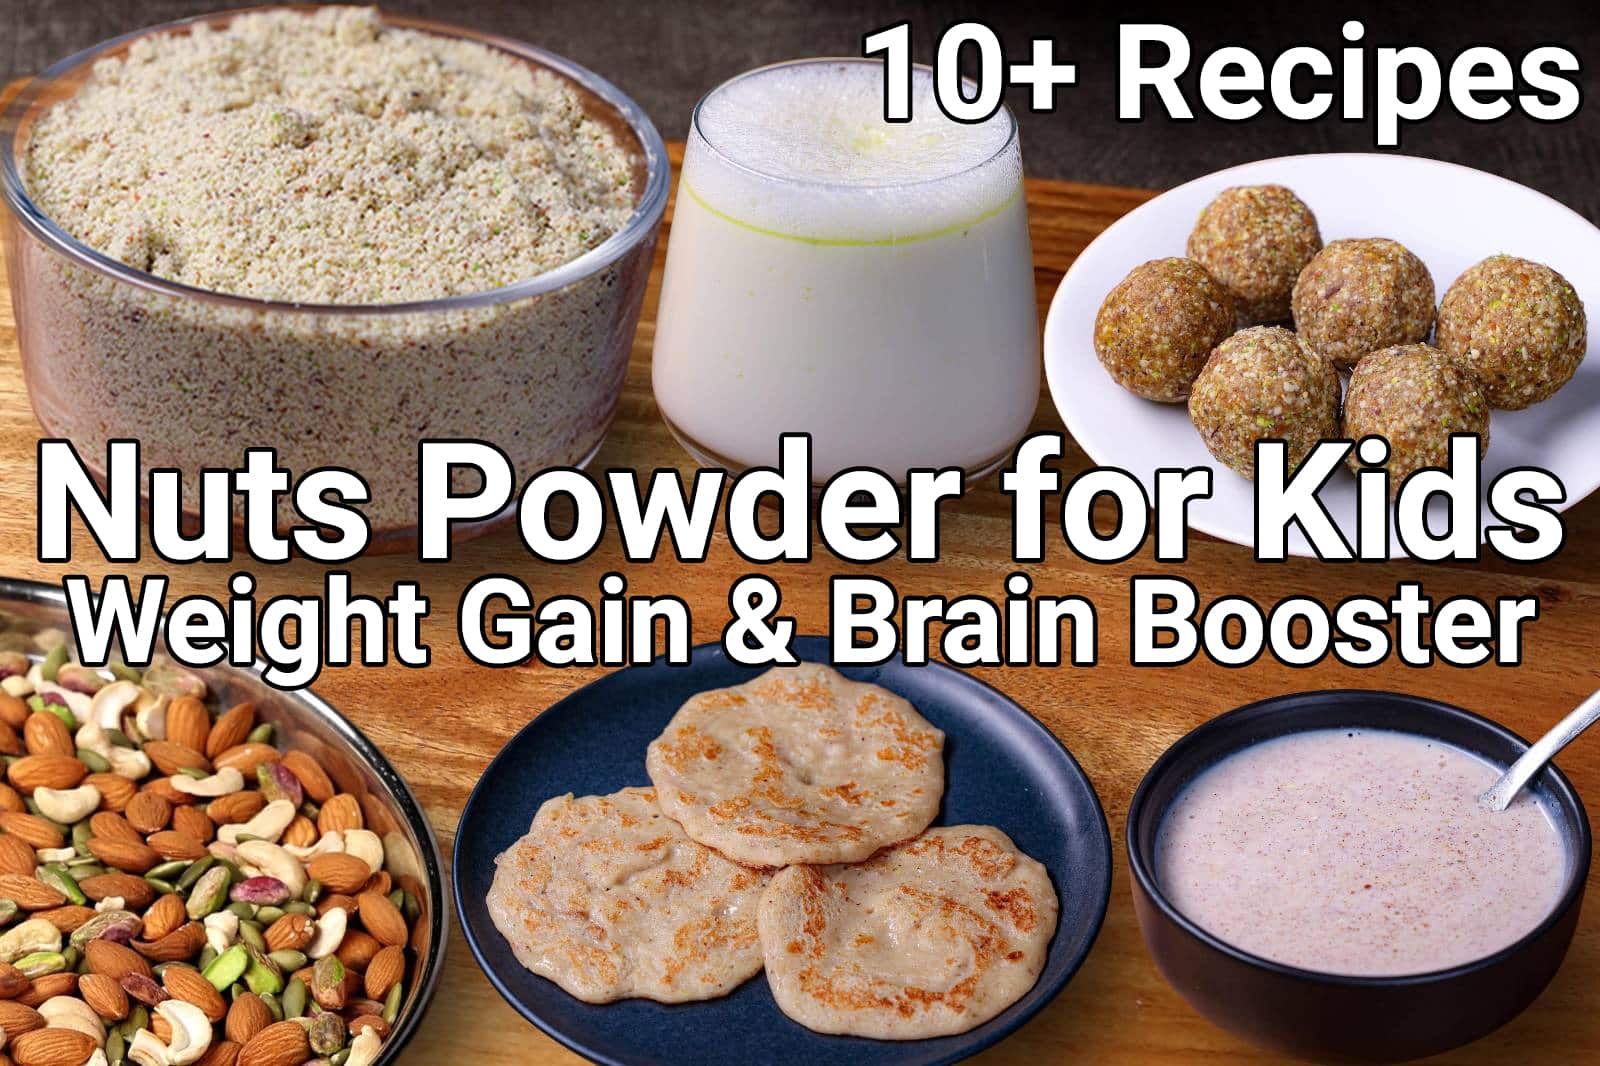 How to Make Homemade Protein Powder